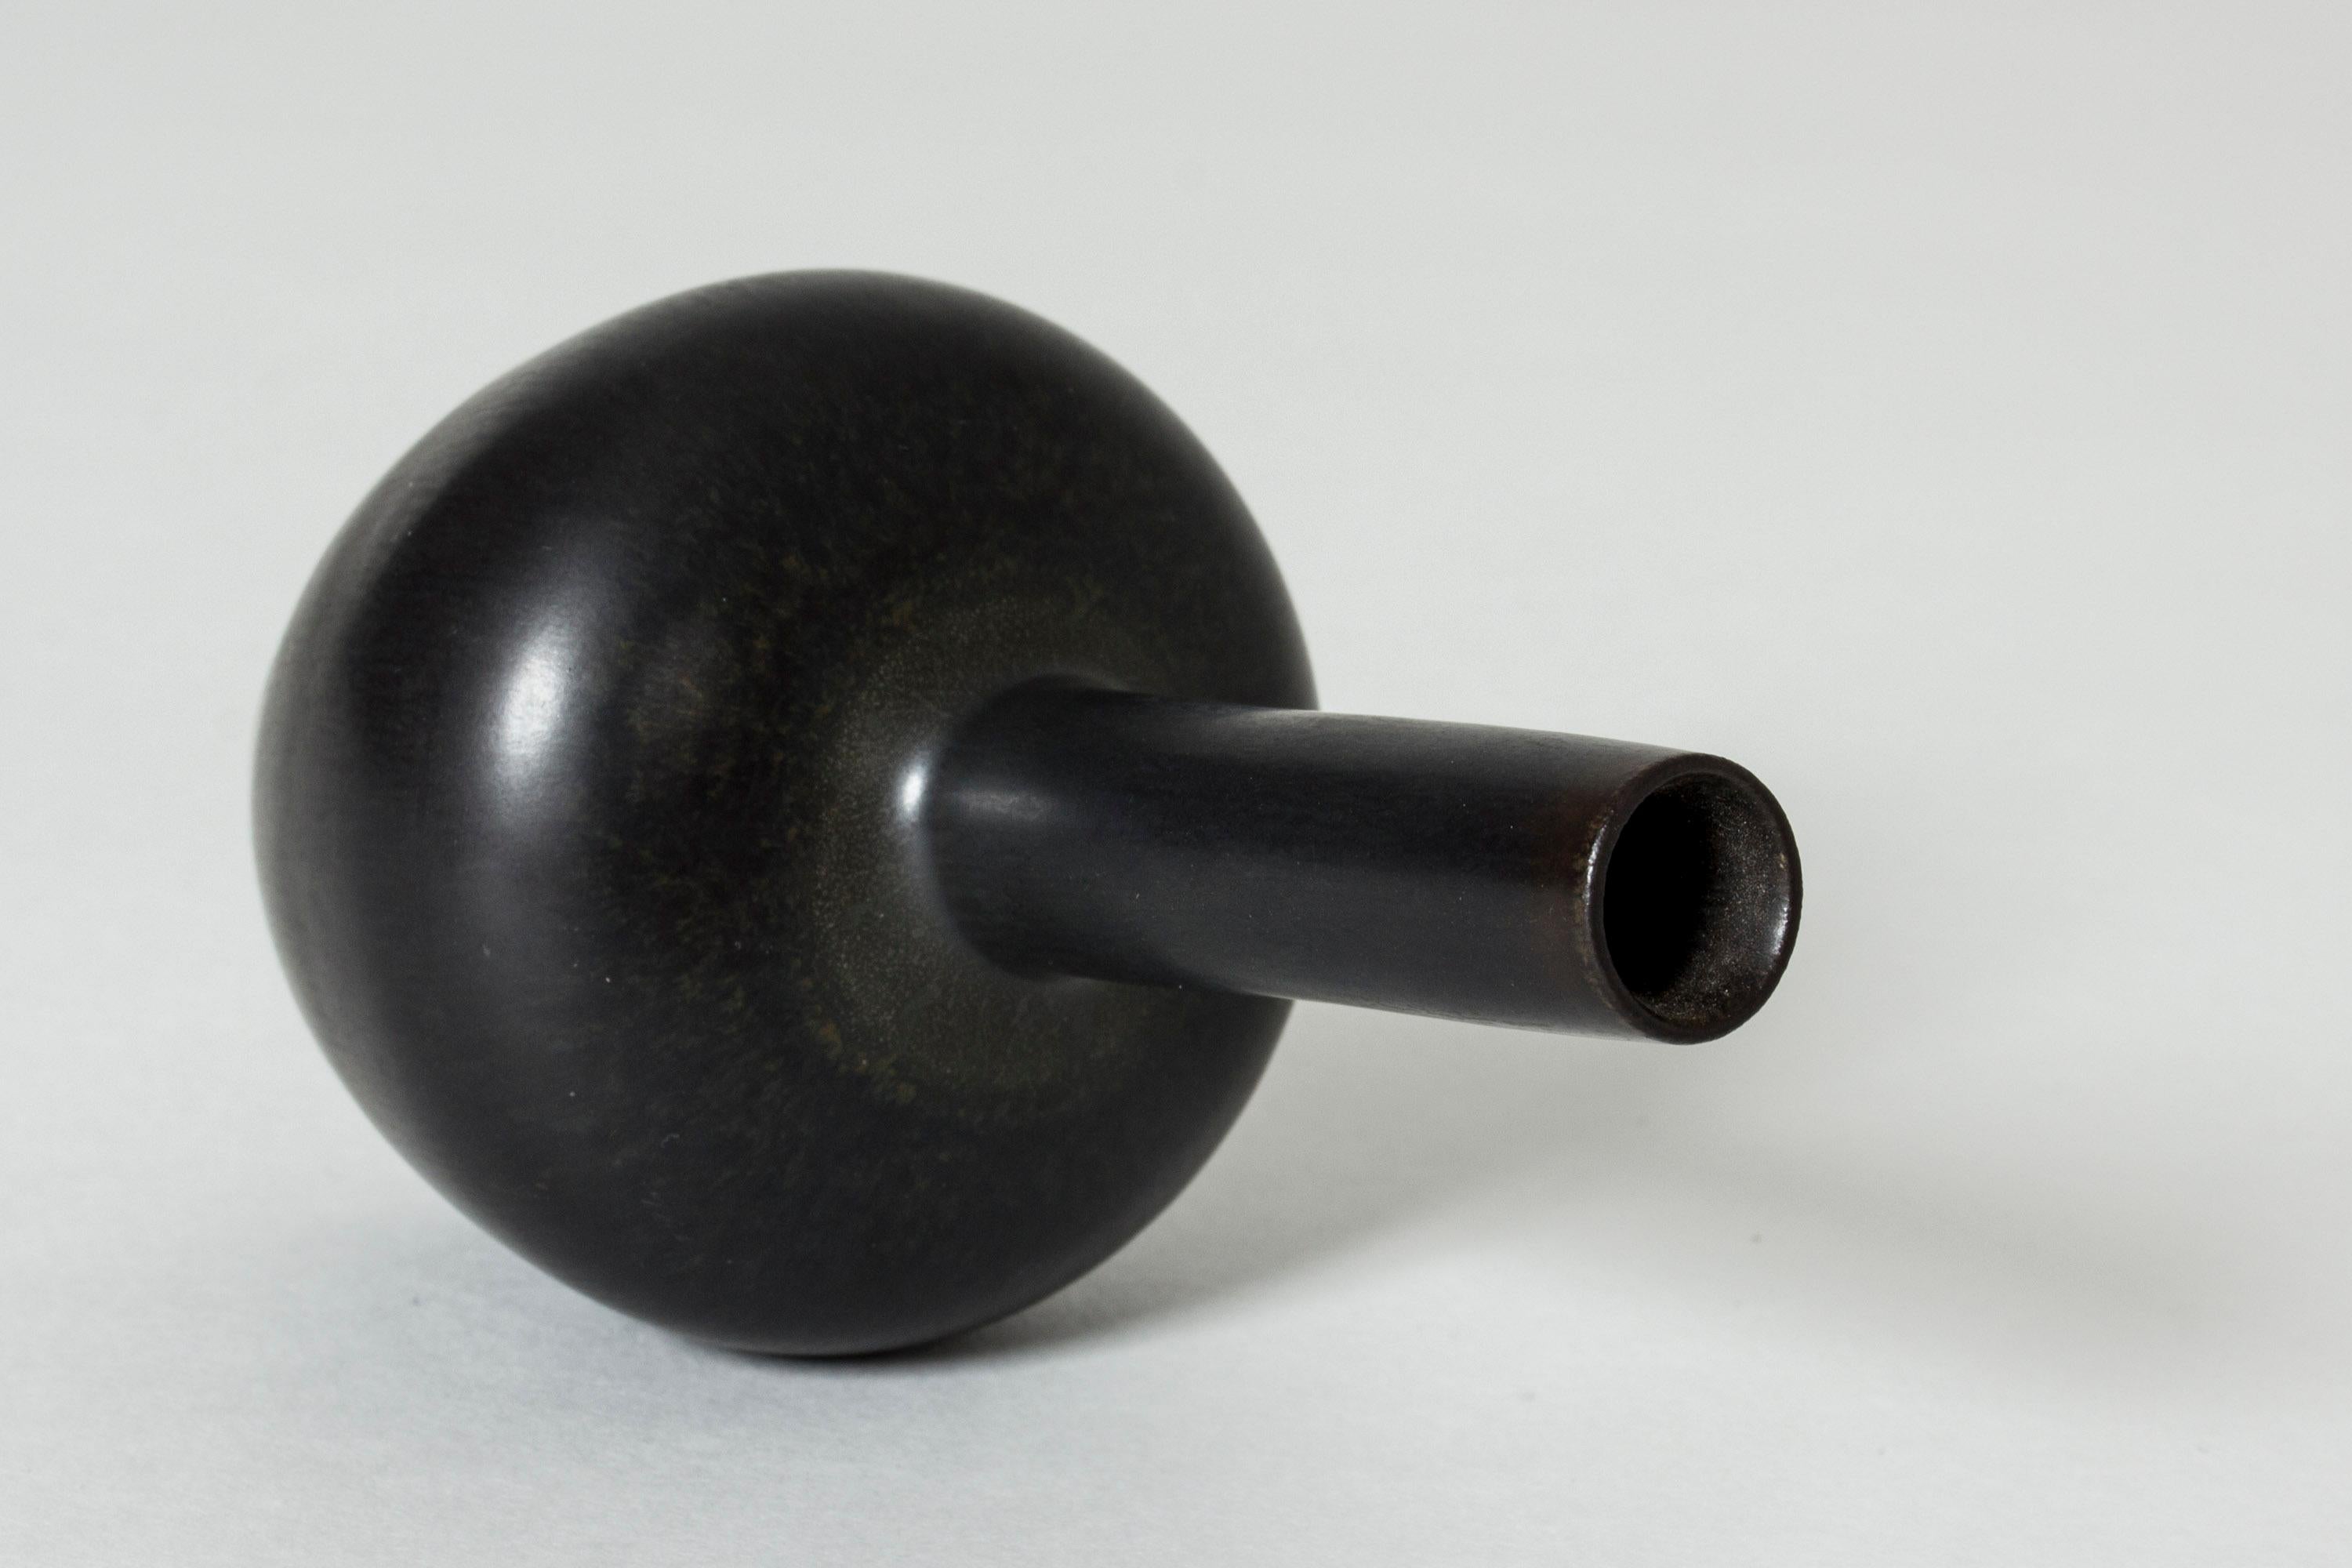 Cool, small stoneware vase by Carl-Harry Stålhane. Straight, long neck extending from the plump body. Smooth black glaze.